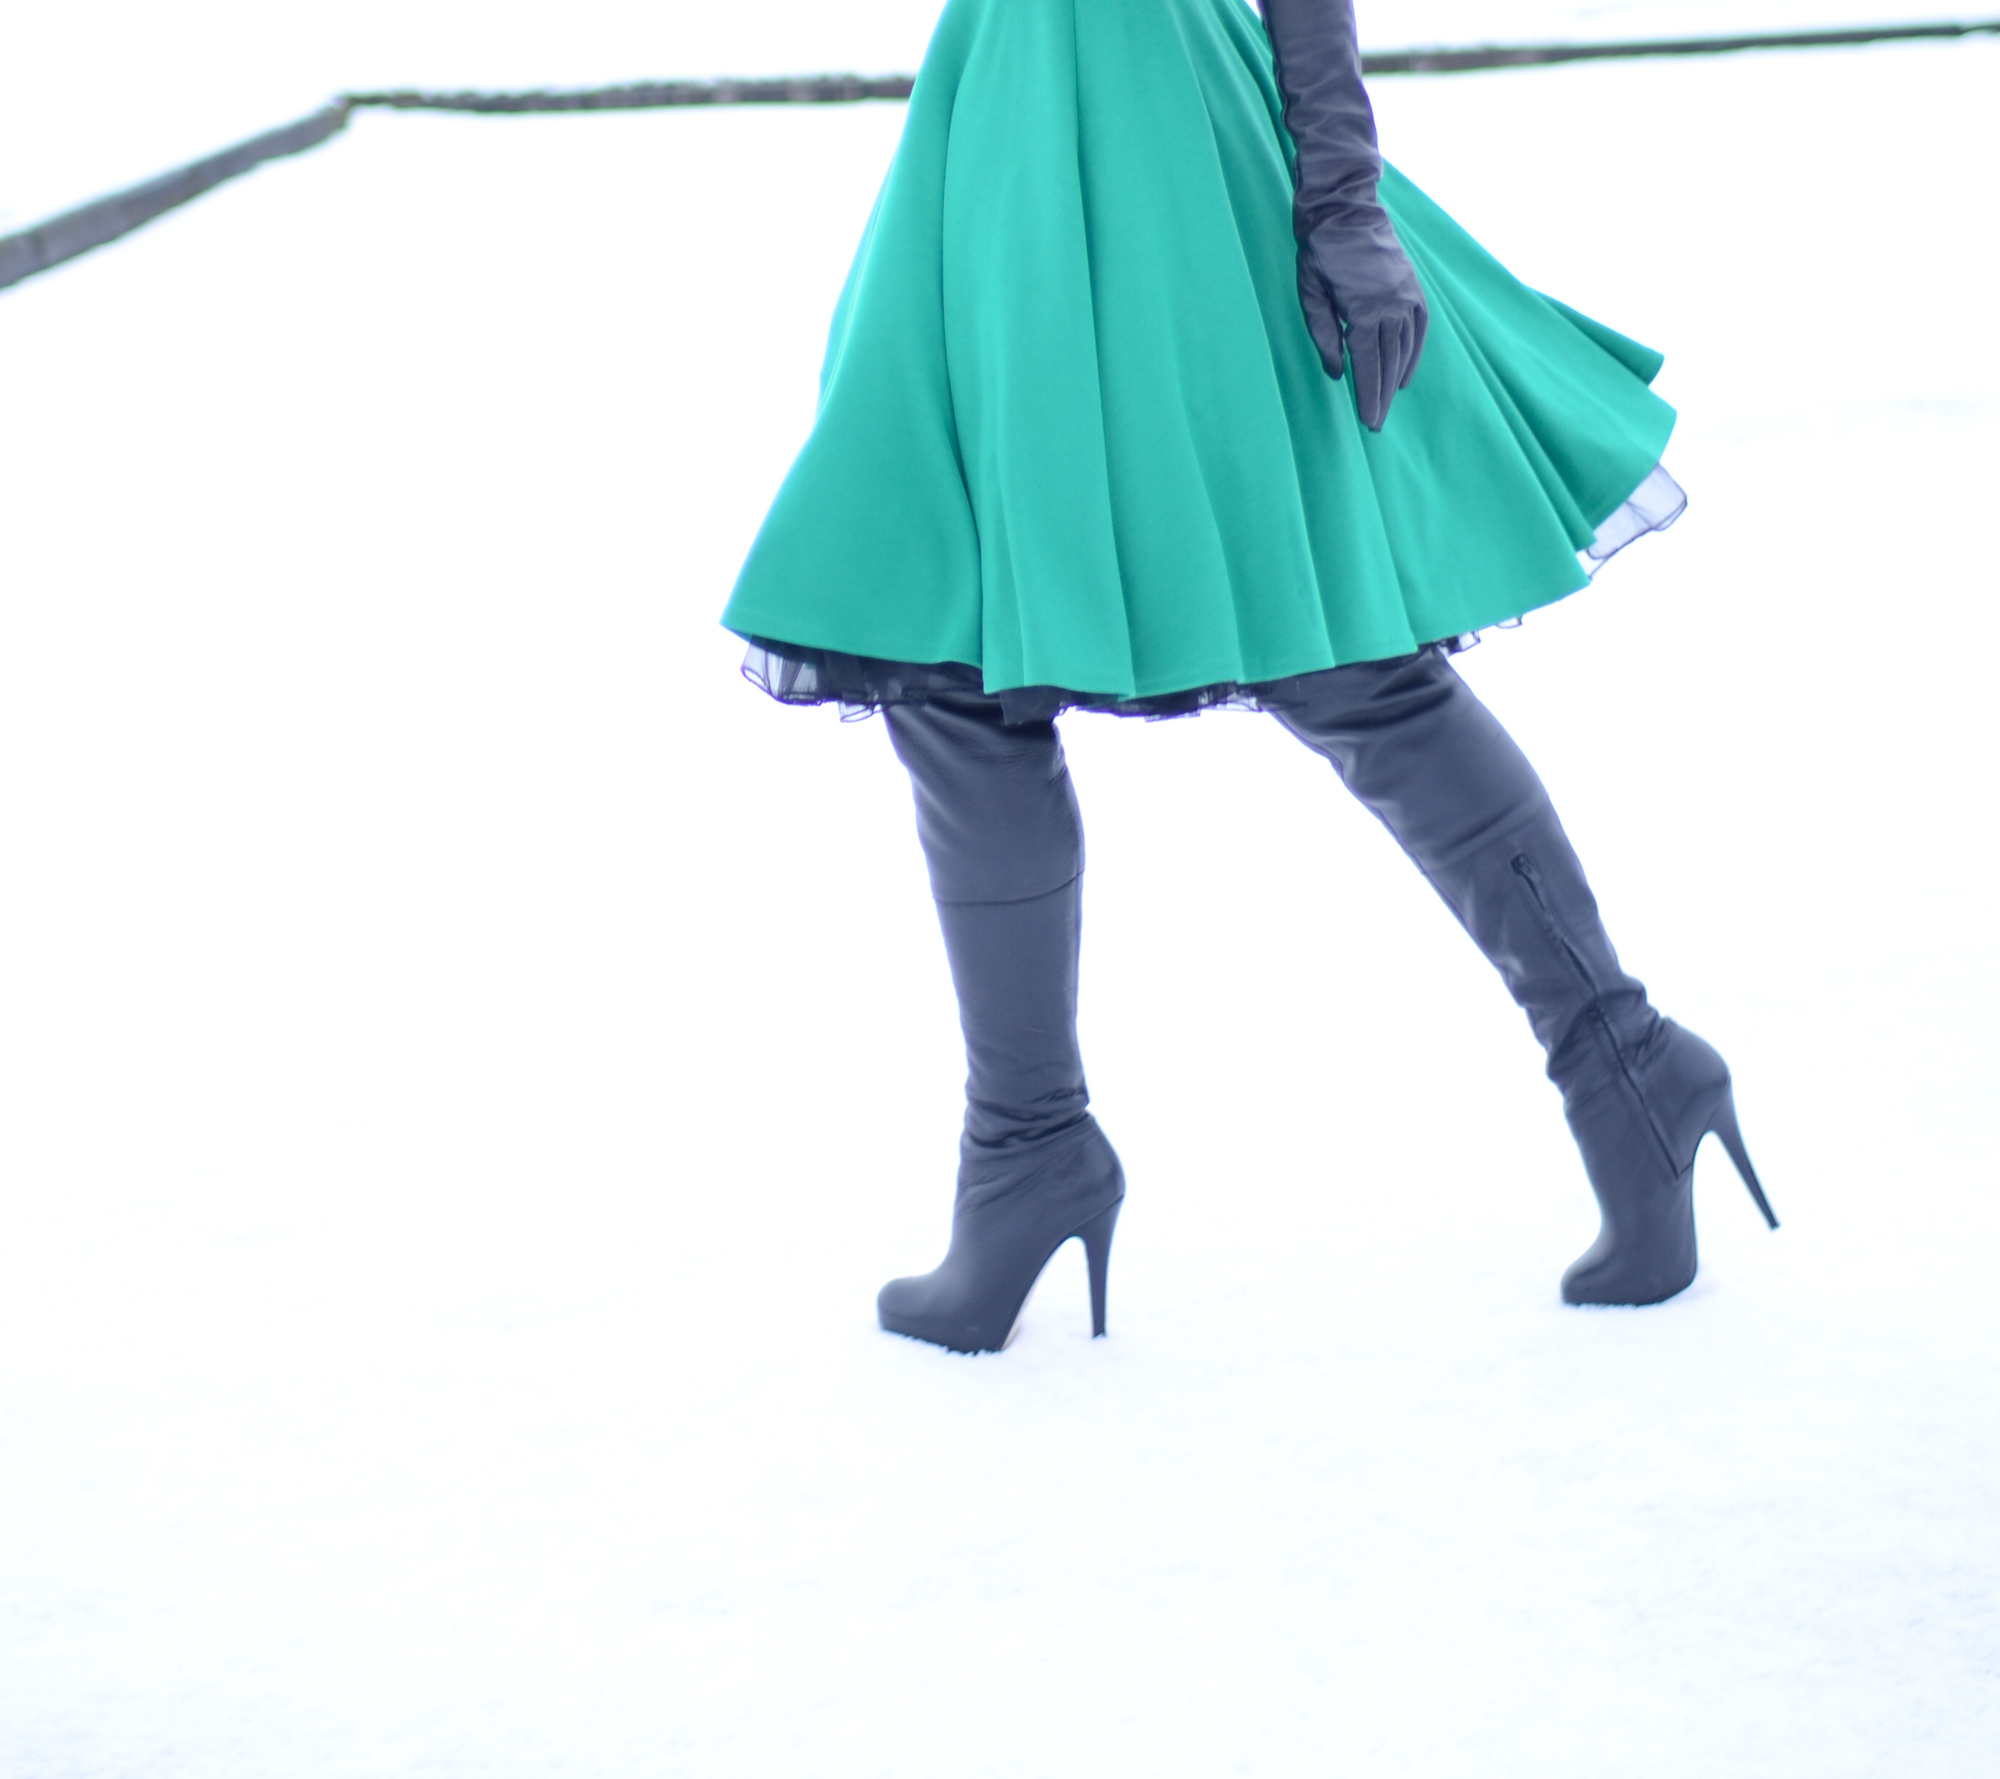 over-the-knee boots with green dress